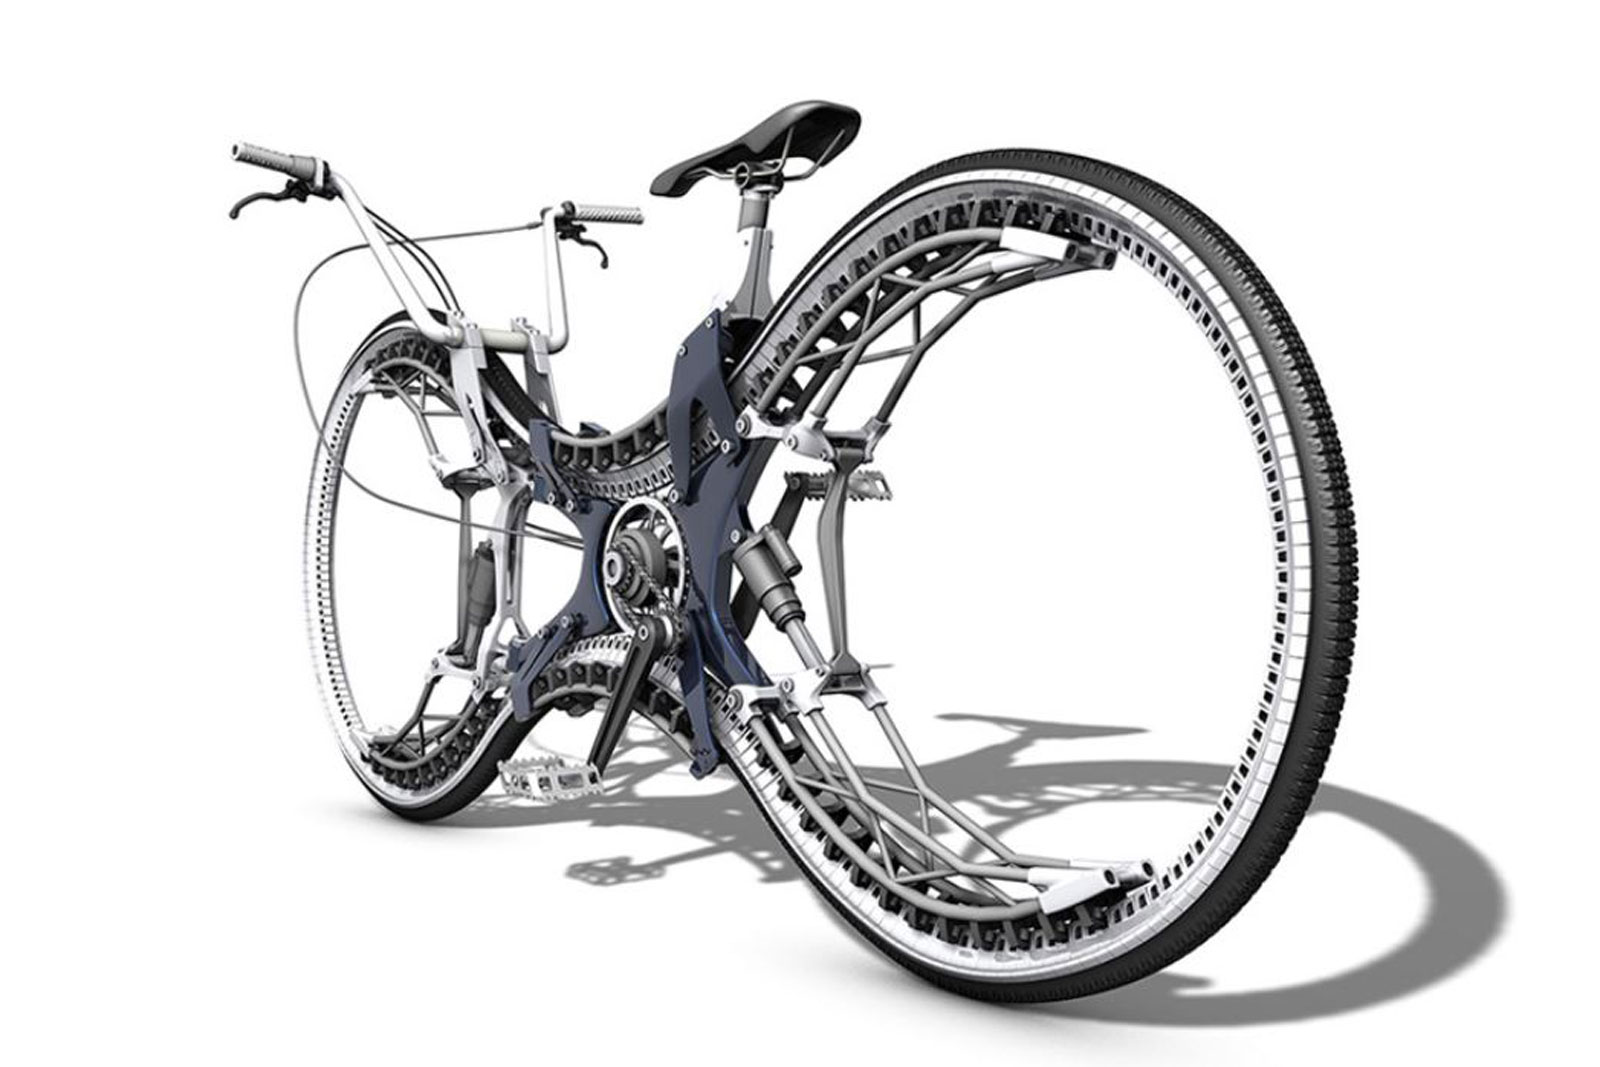 infinity bike concept sintratec sls additive manufacturing render all wheel drive bicycle stephan henrich